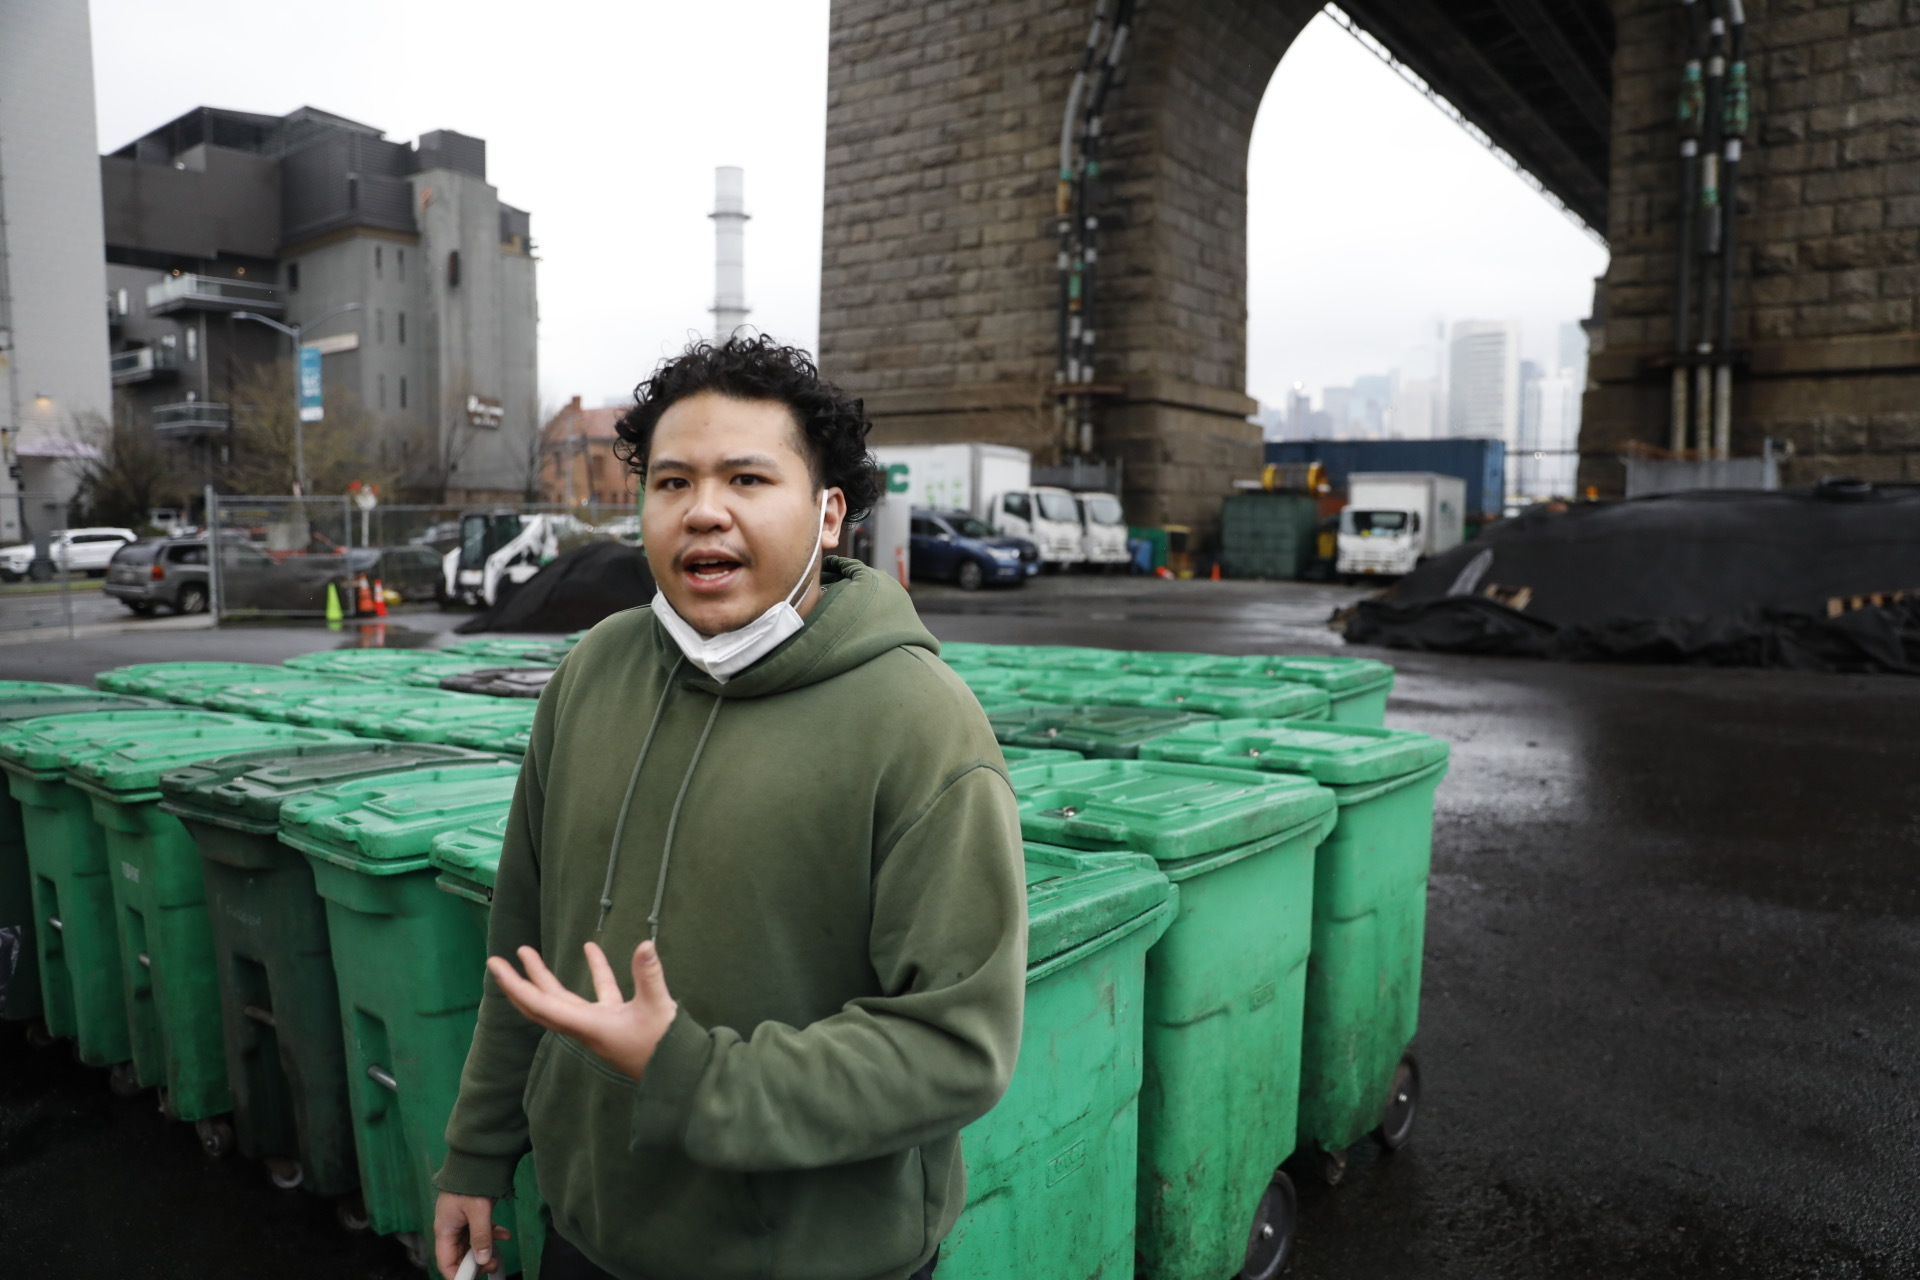 A man in a hoodie stands in front of compost bins beneath the Queensboro Bridge.